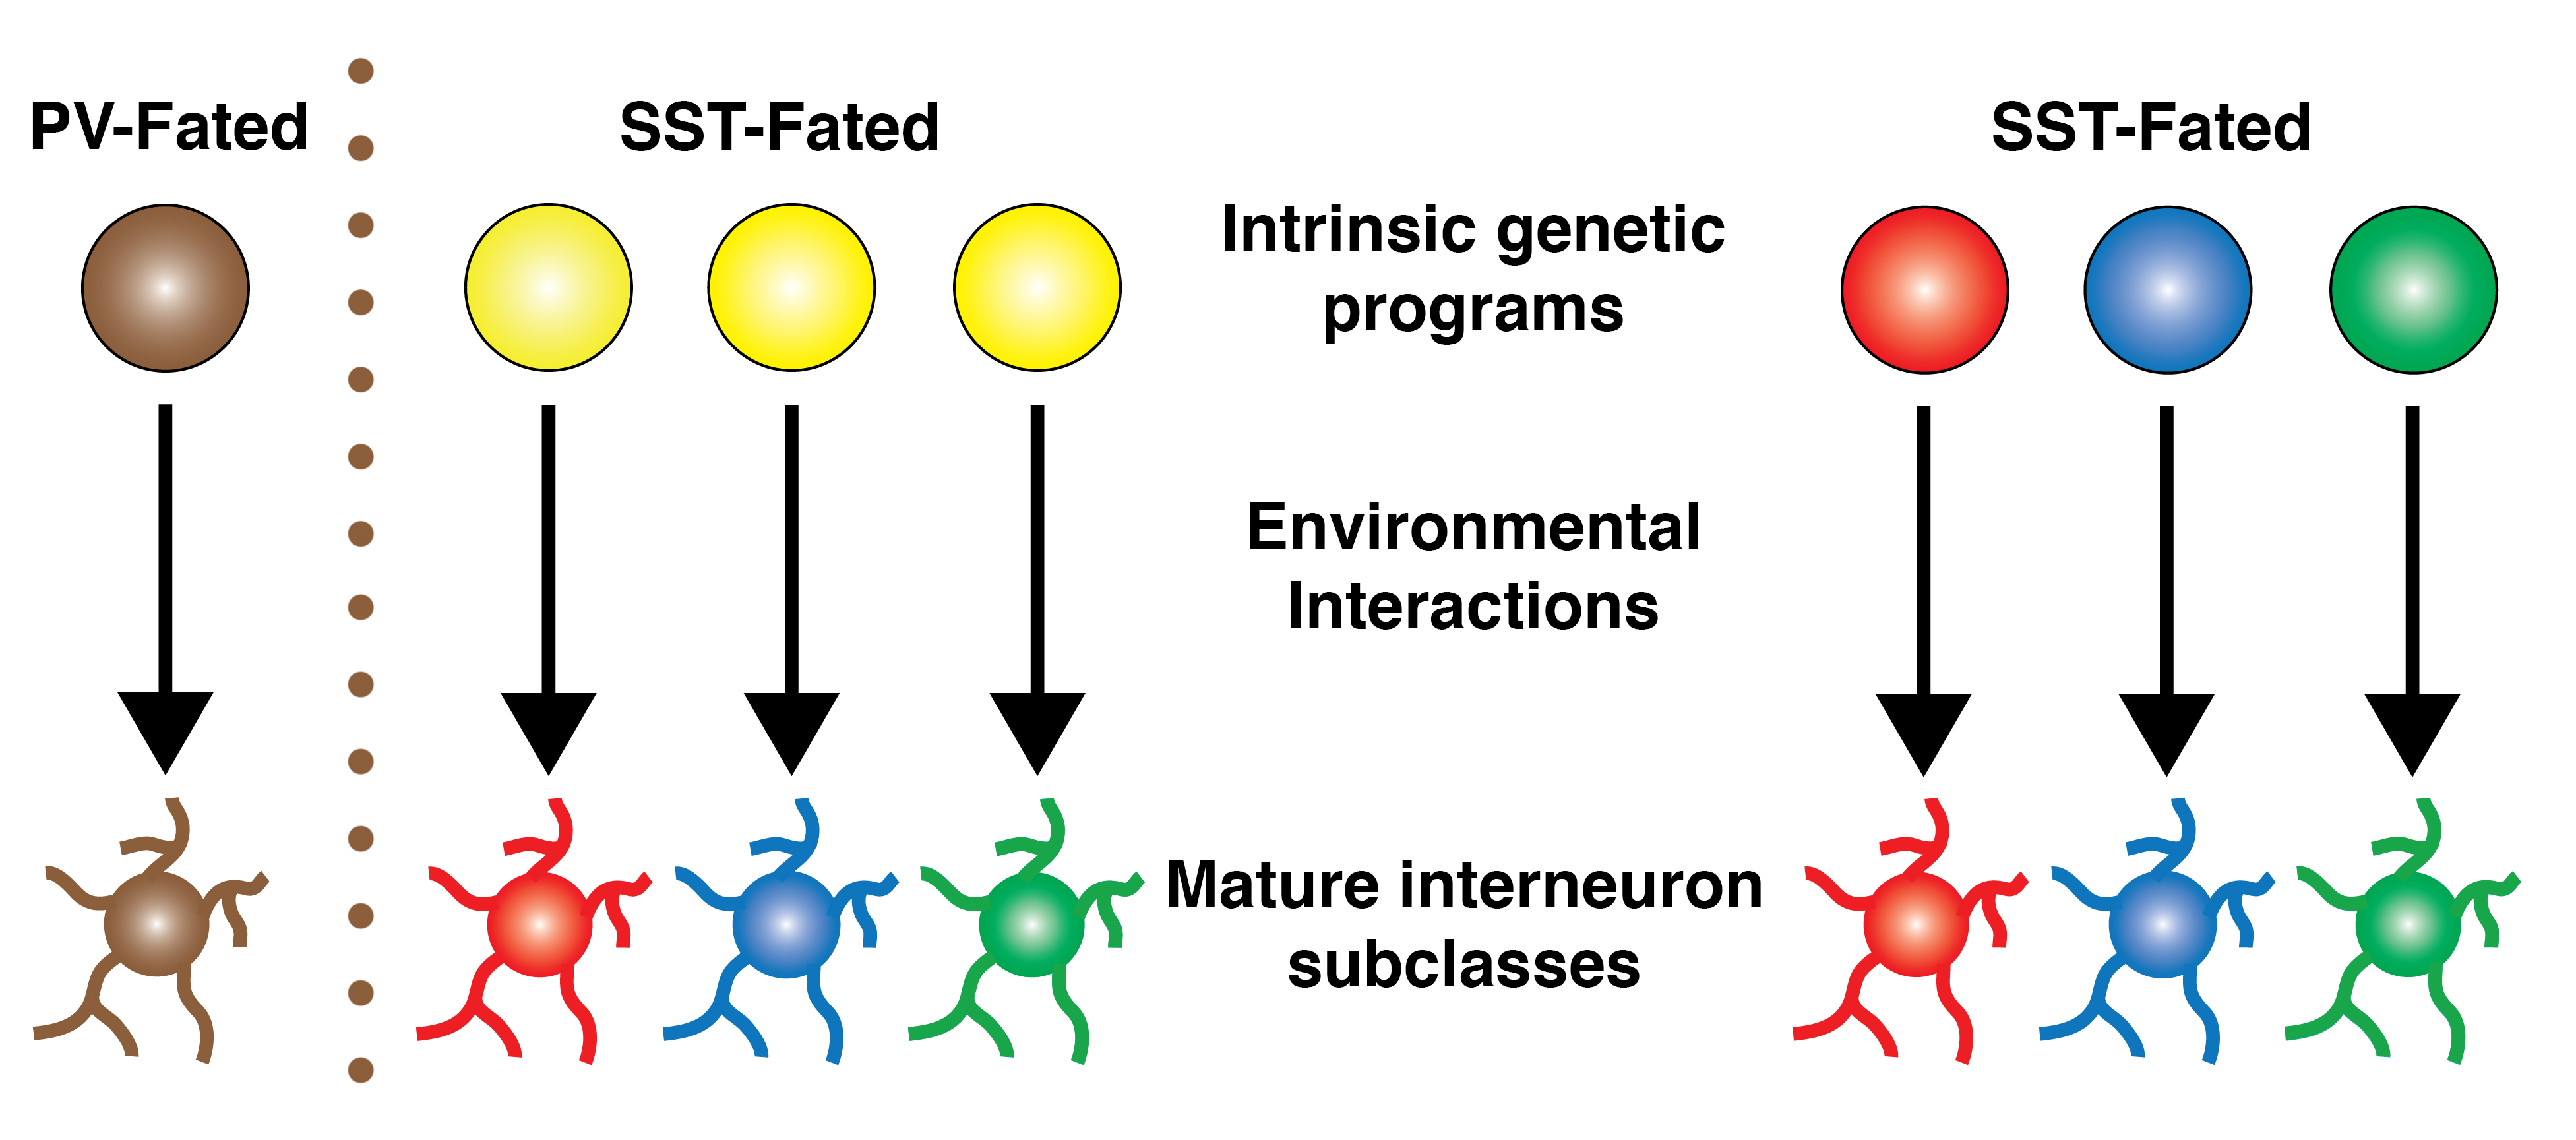 Illustration of PV-fated and SST-fated neurons through intrinsic genetic programs, environmental interactions, and mature interneuron subclasses.